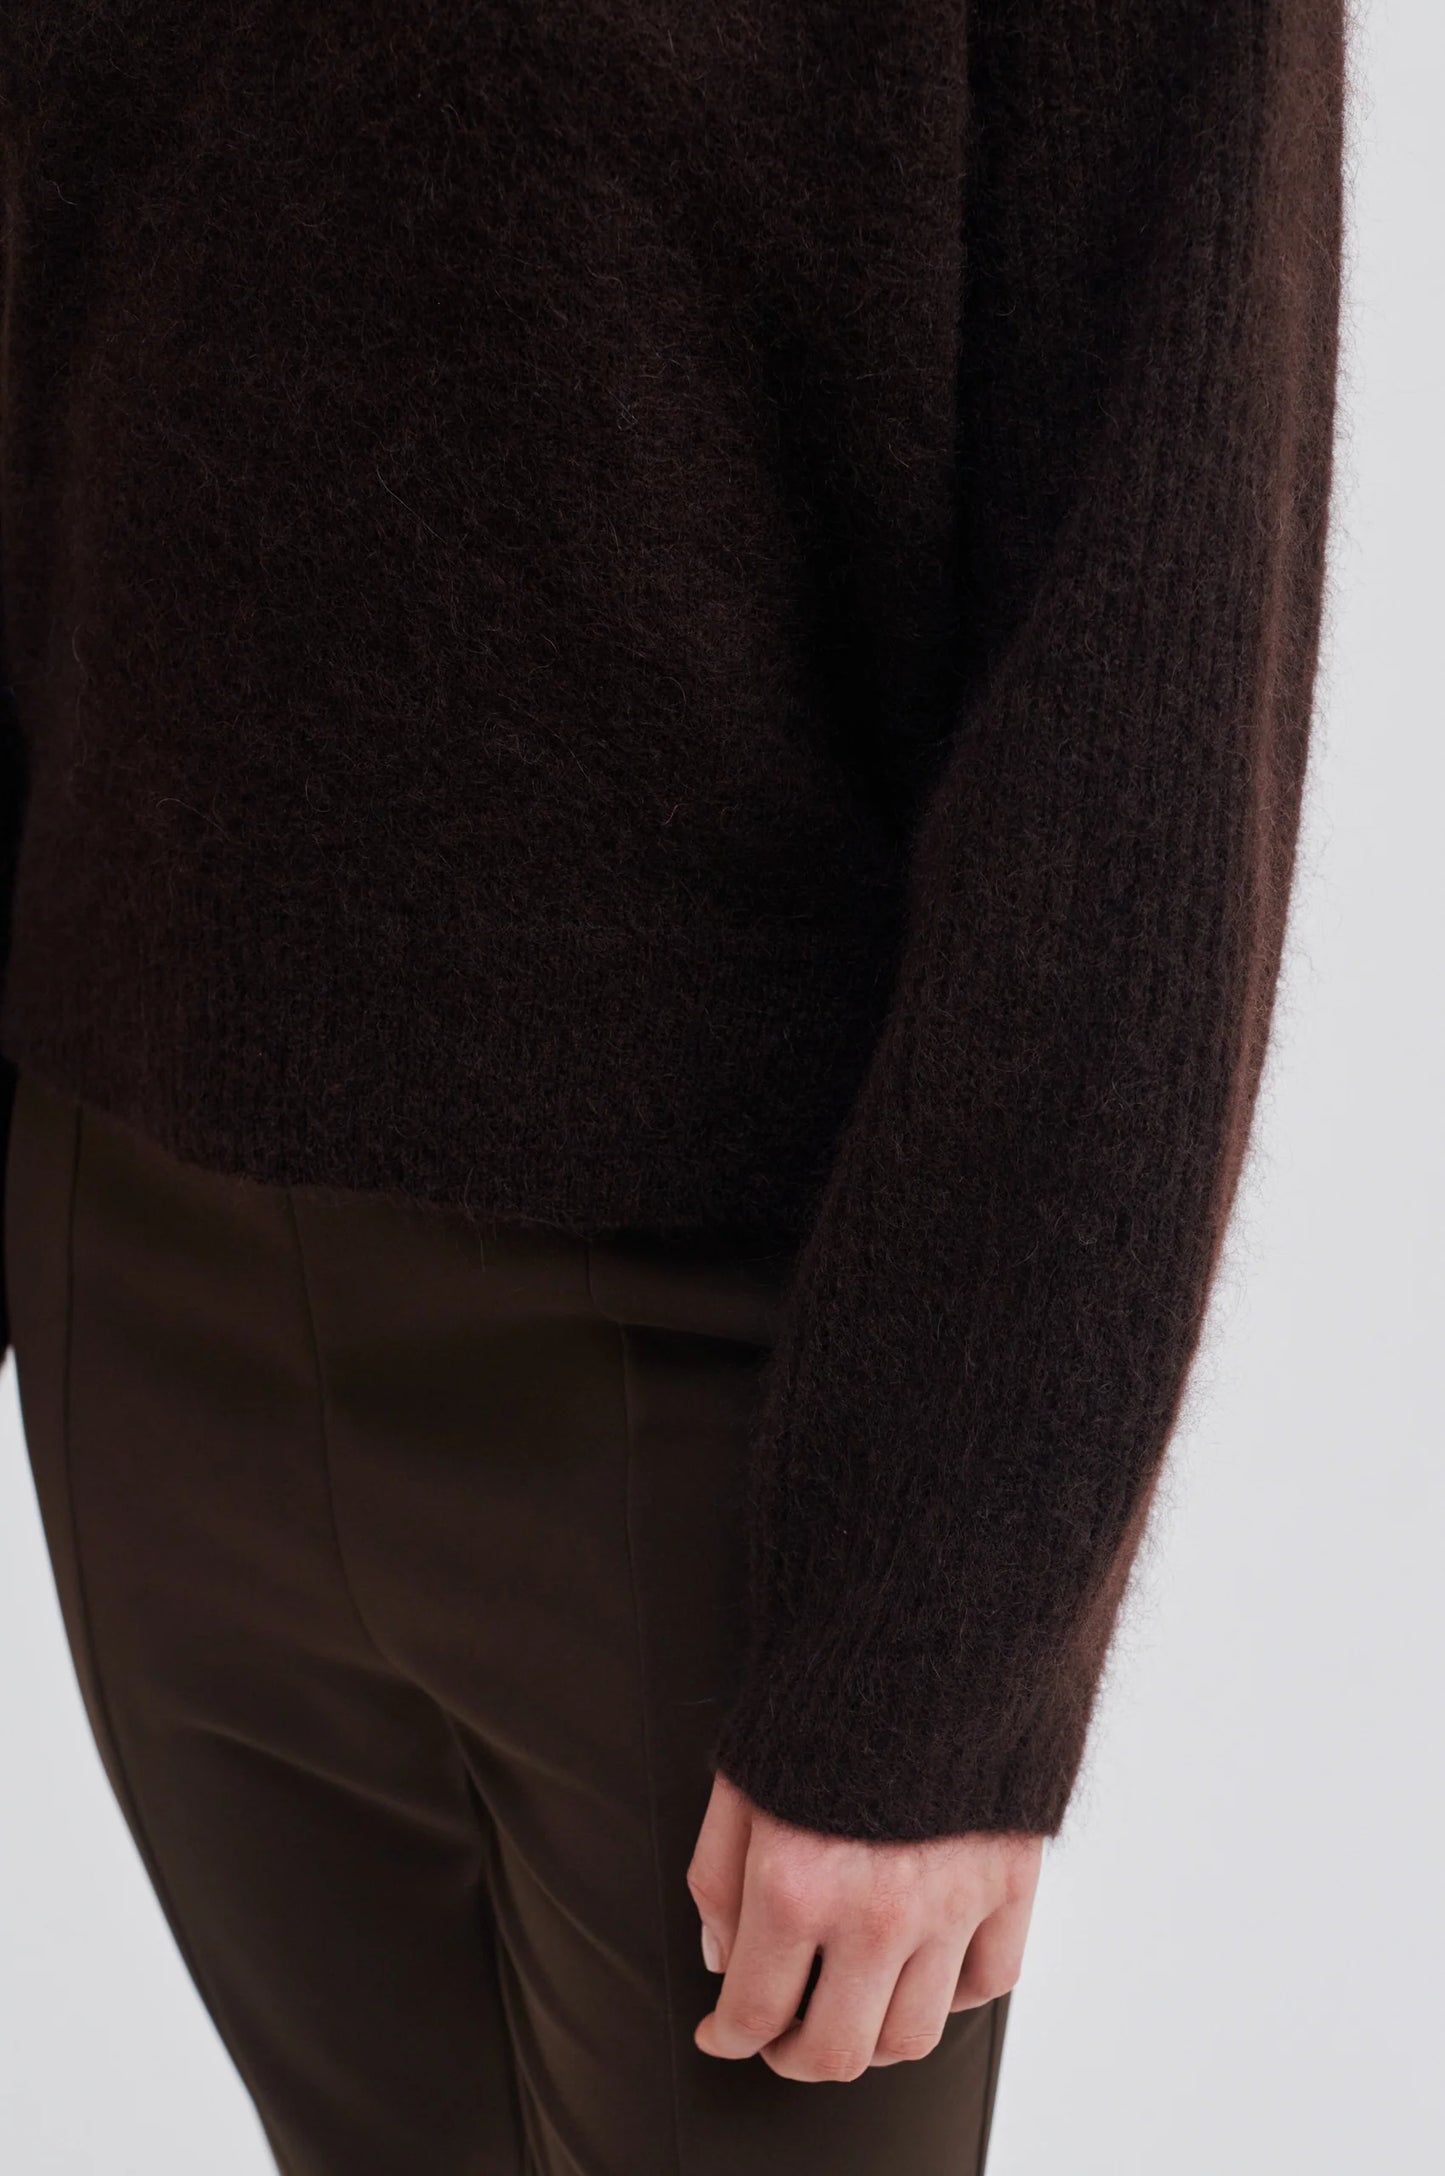 SECOND FEMALE | WOMEN'S SWEATERS | BROOKLINE KNIT NEW O-NECK MOLÉ | BROWN